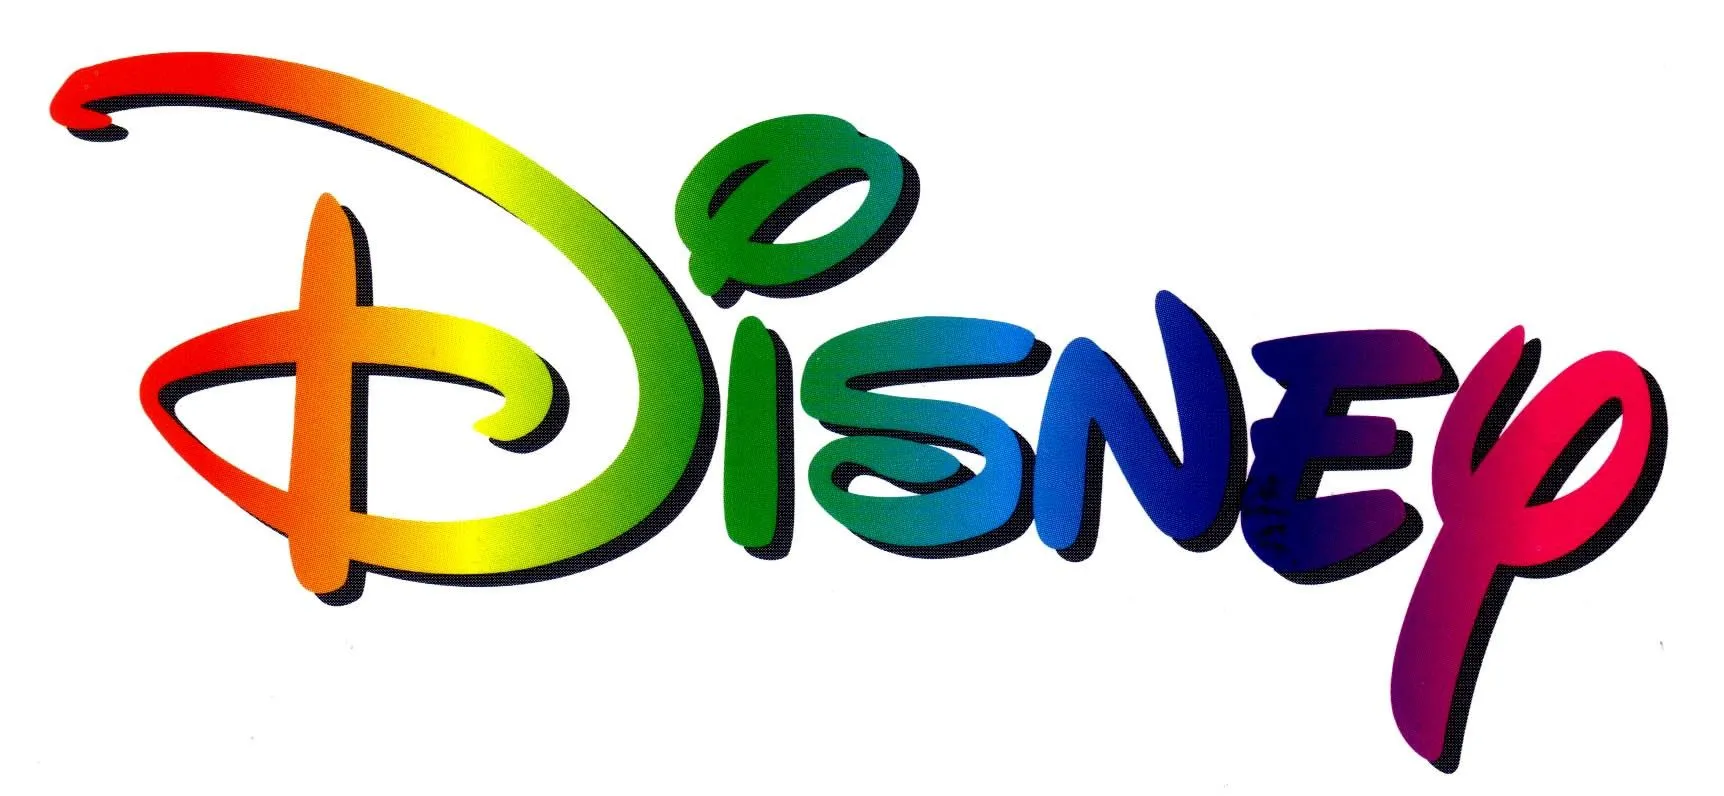 Walt Disney Co (DIS): New Tricks From a Familiar Name | InvestorPlace